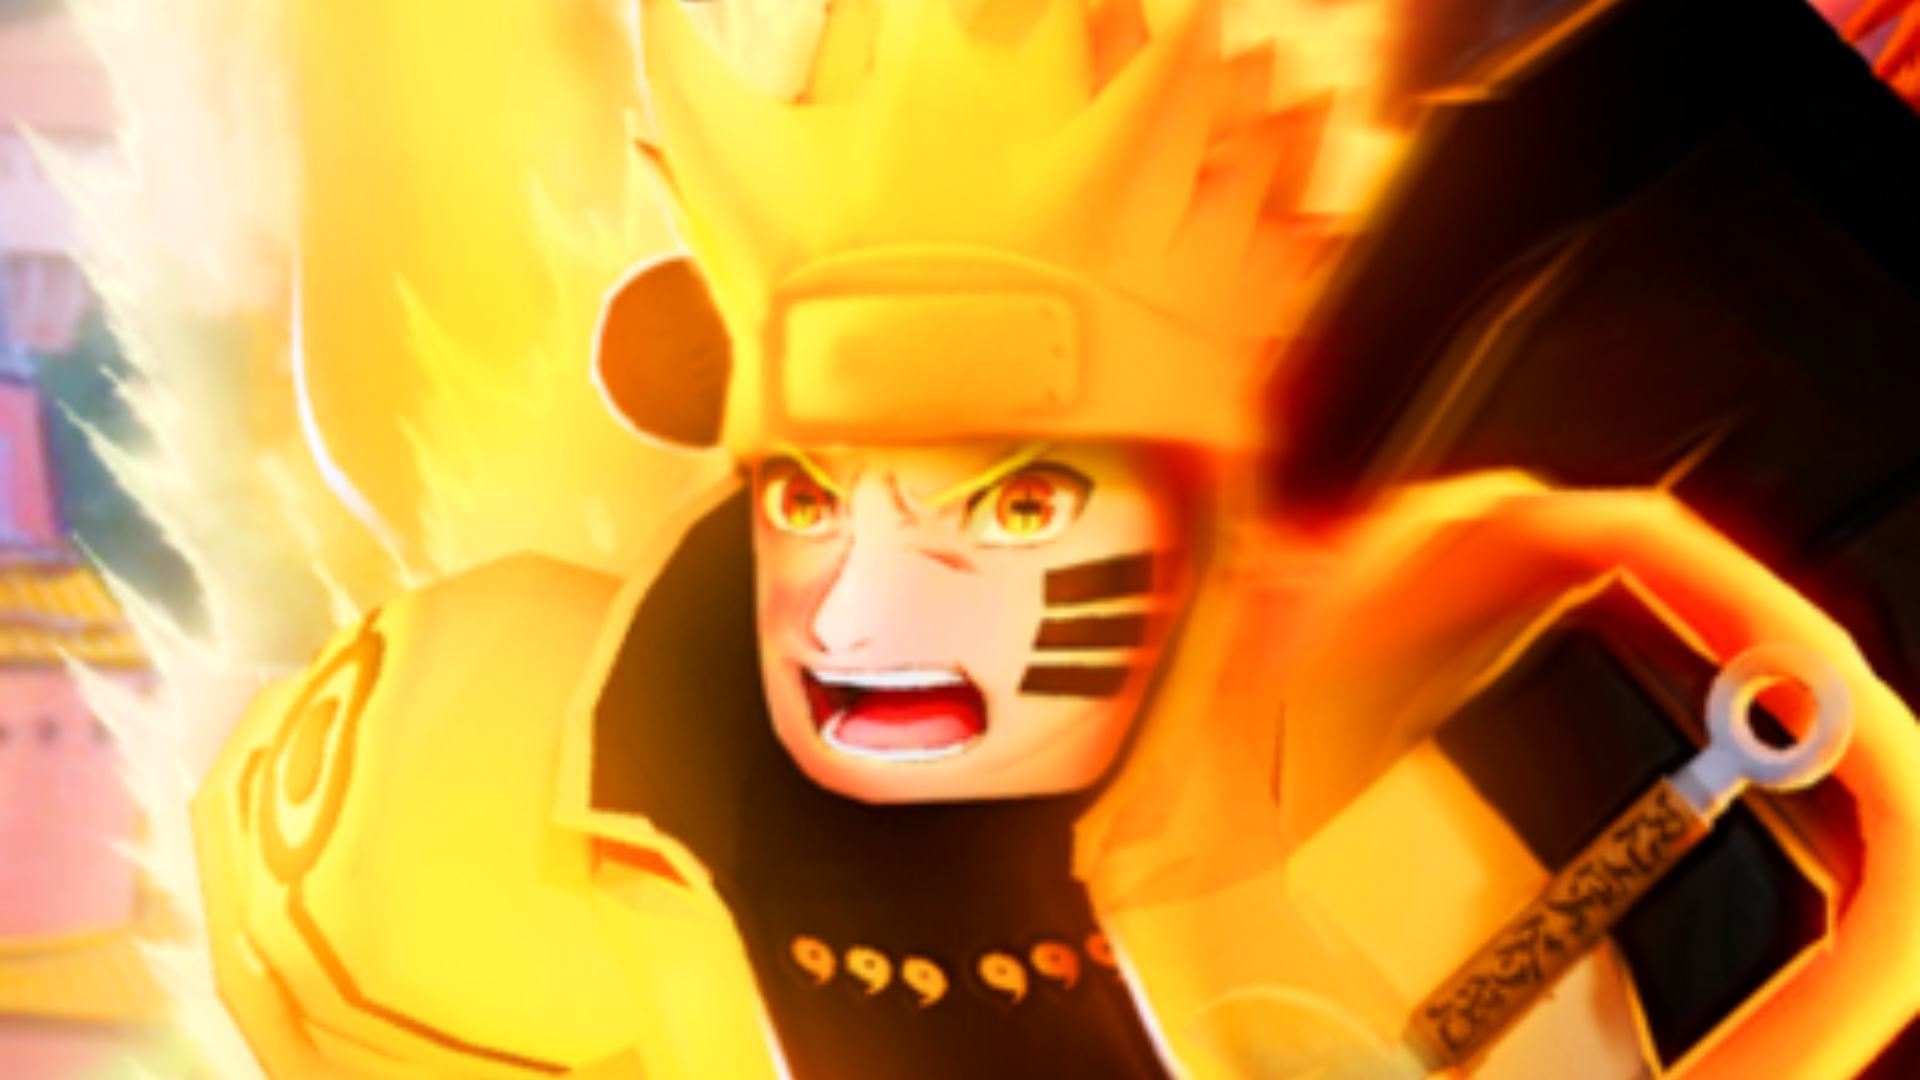 Anime Journey codes in Roblox Free spins resets and more August 2022